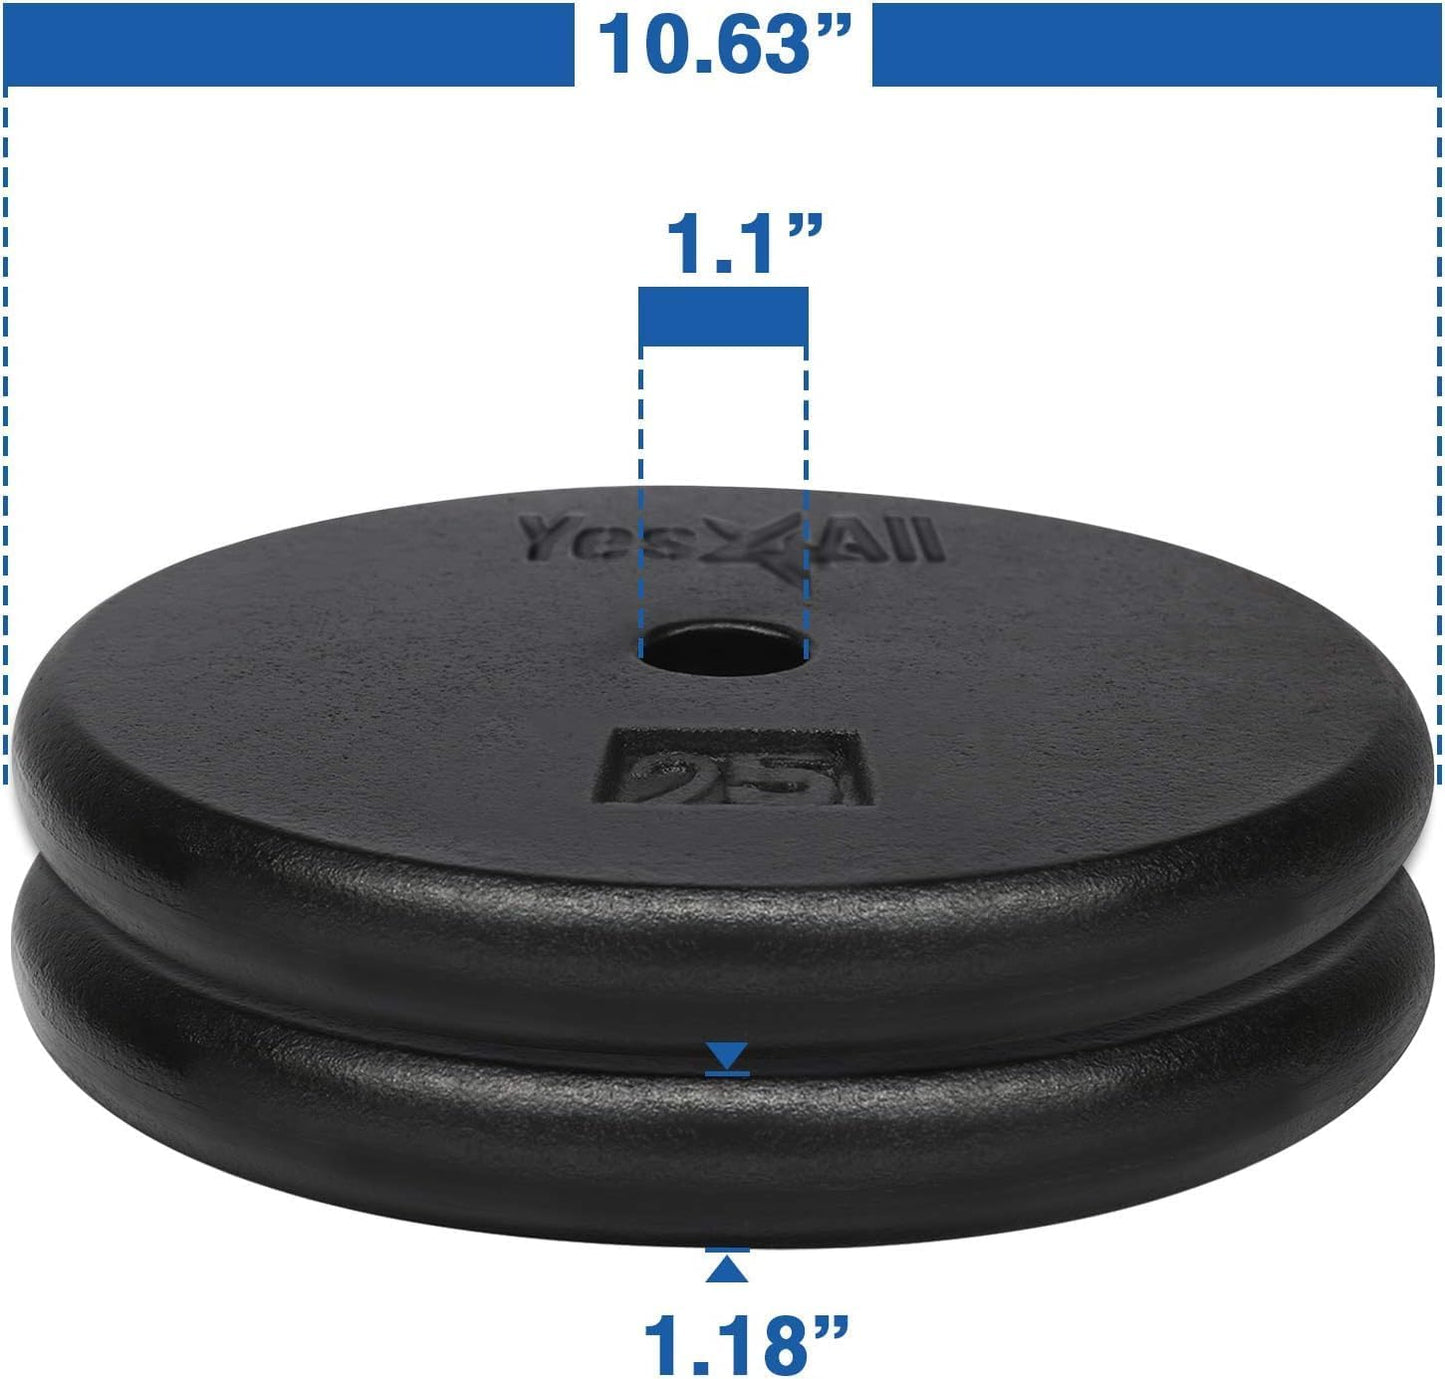 Yes4All Standard 1" Cast Iron Weight Plate - Ideal for Strength Training - Multiple Weight: 5LB to 25LB (Set of 2)